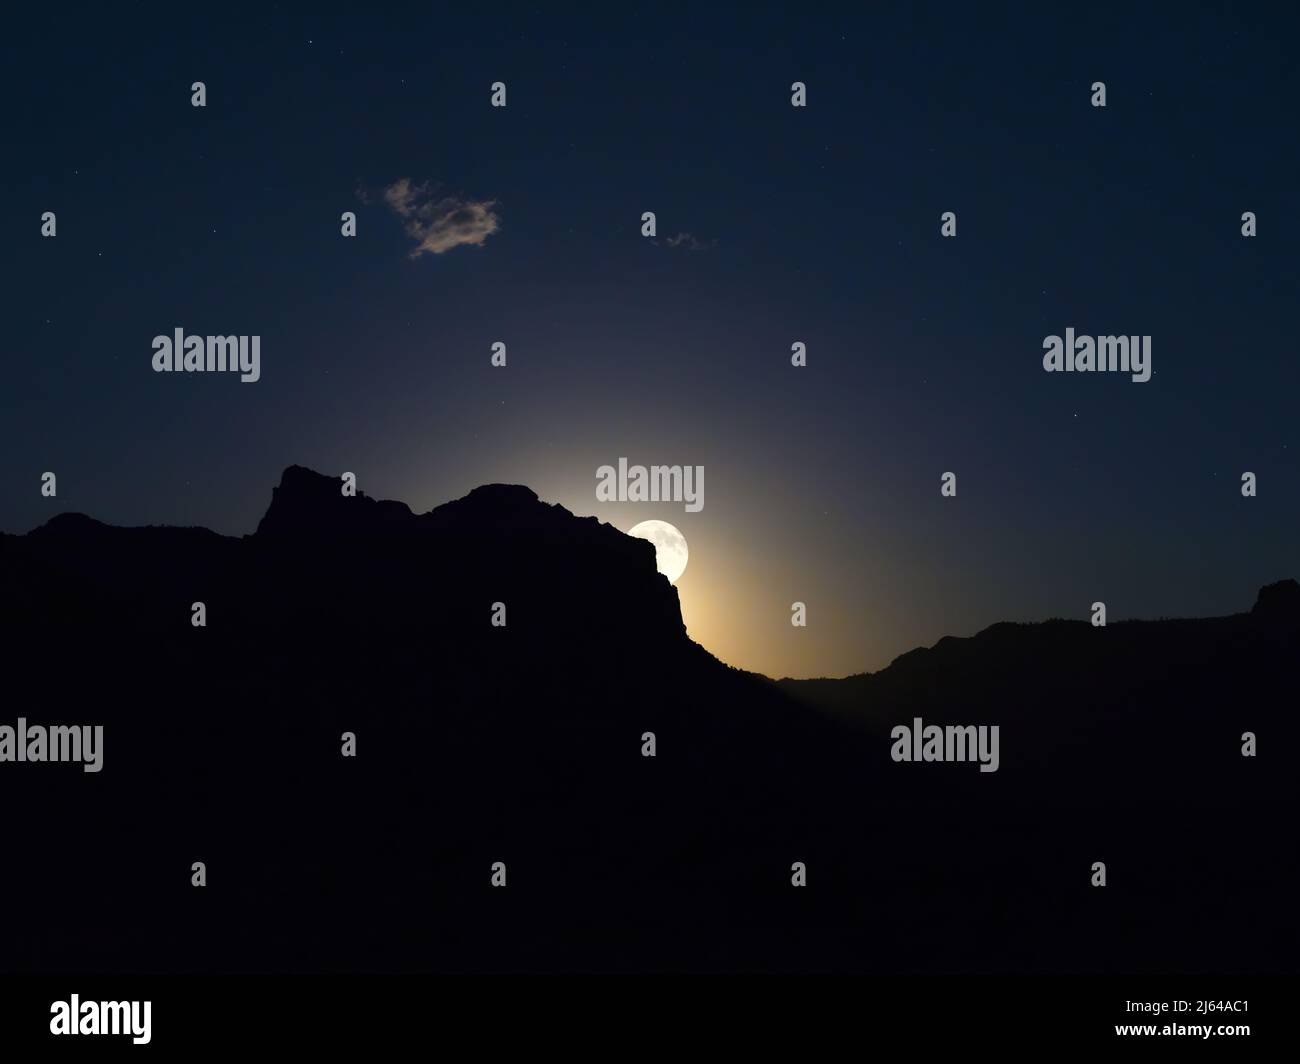 A spectacular scene of a full moon rising at Zion National Park, Utah, USA. Stock Photo